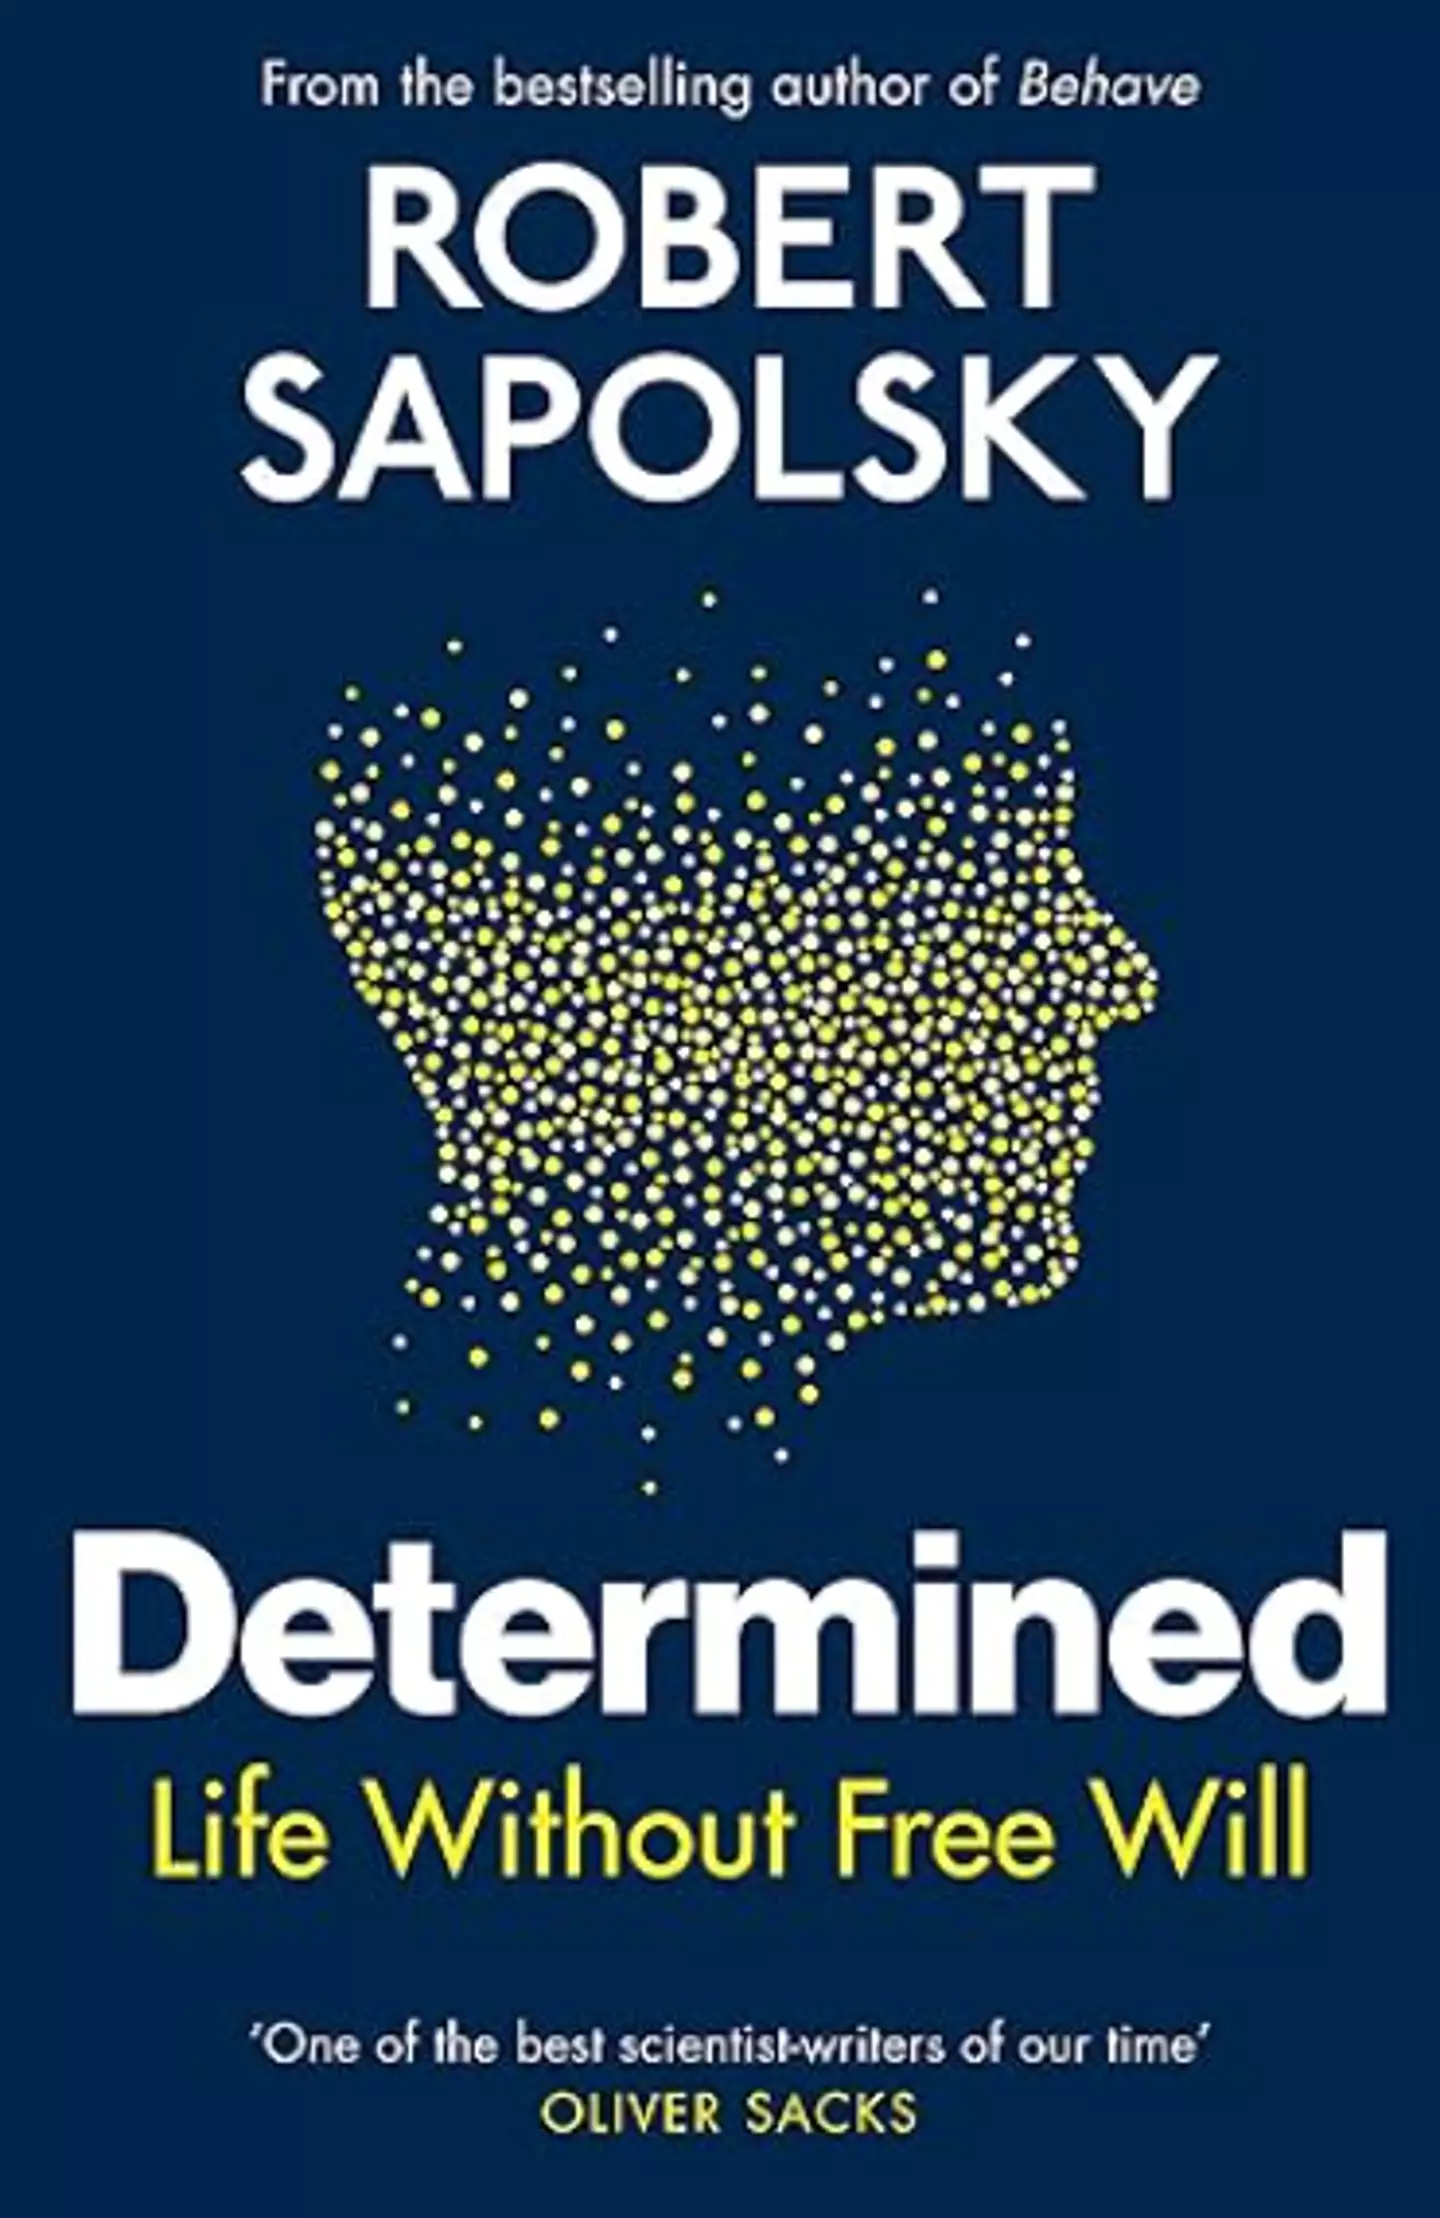 Sapolsky delves into the argument in his book 'Determined: Life Without Free Will'.